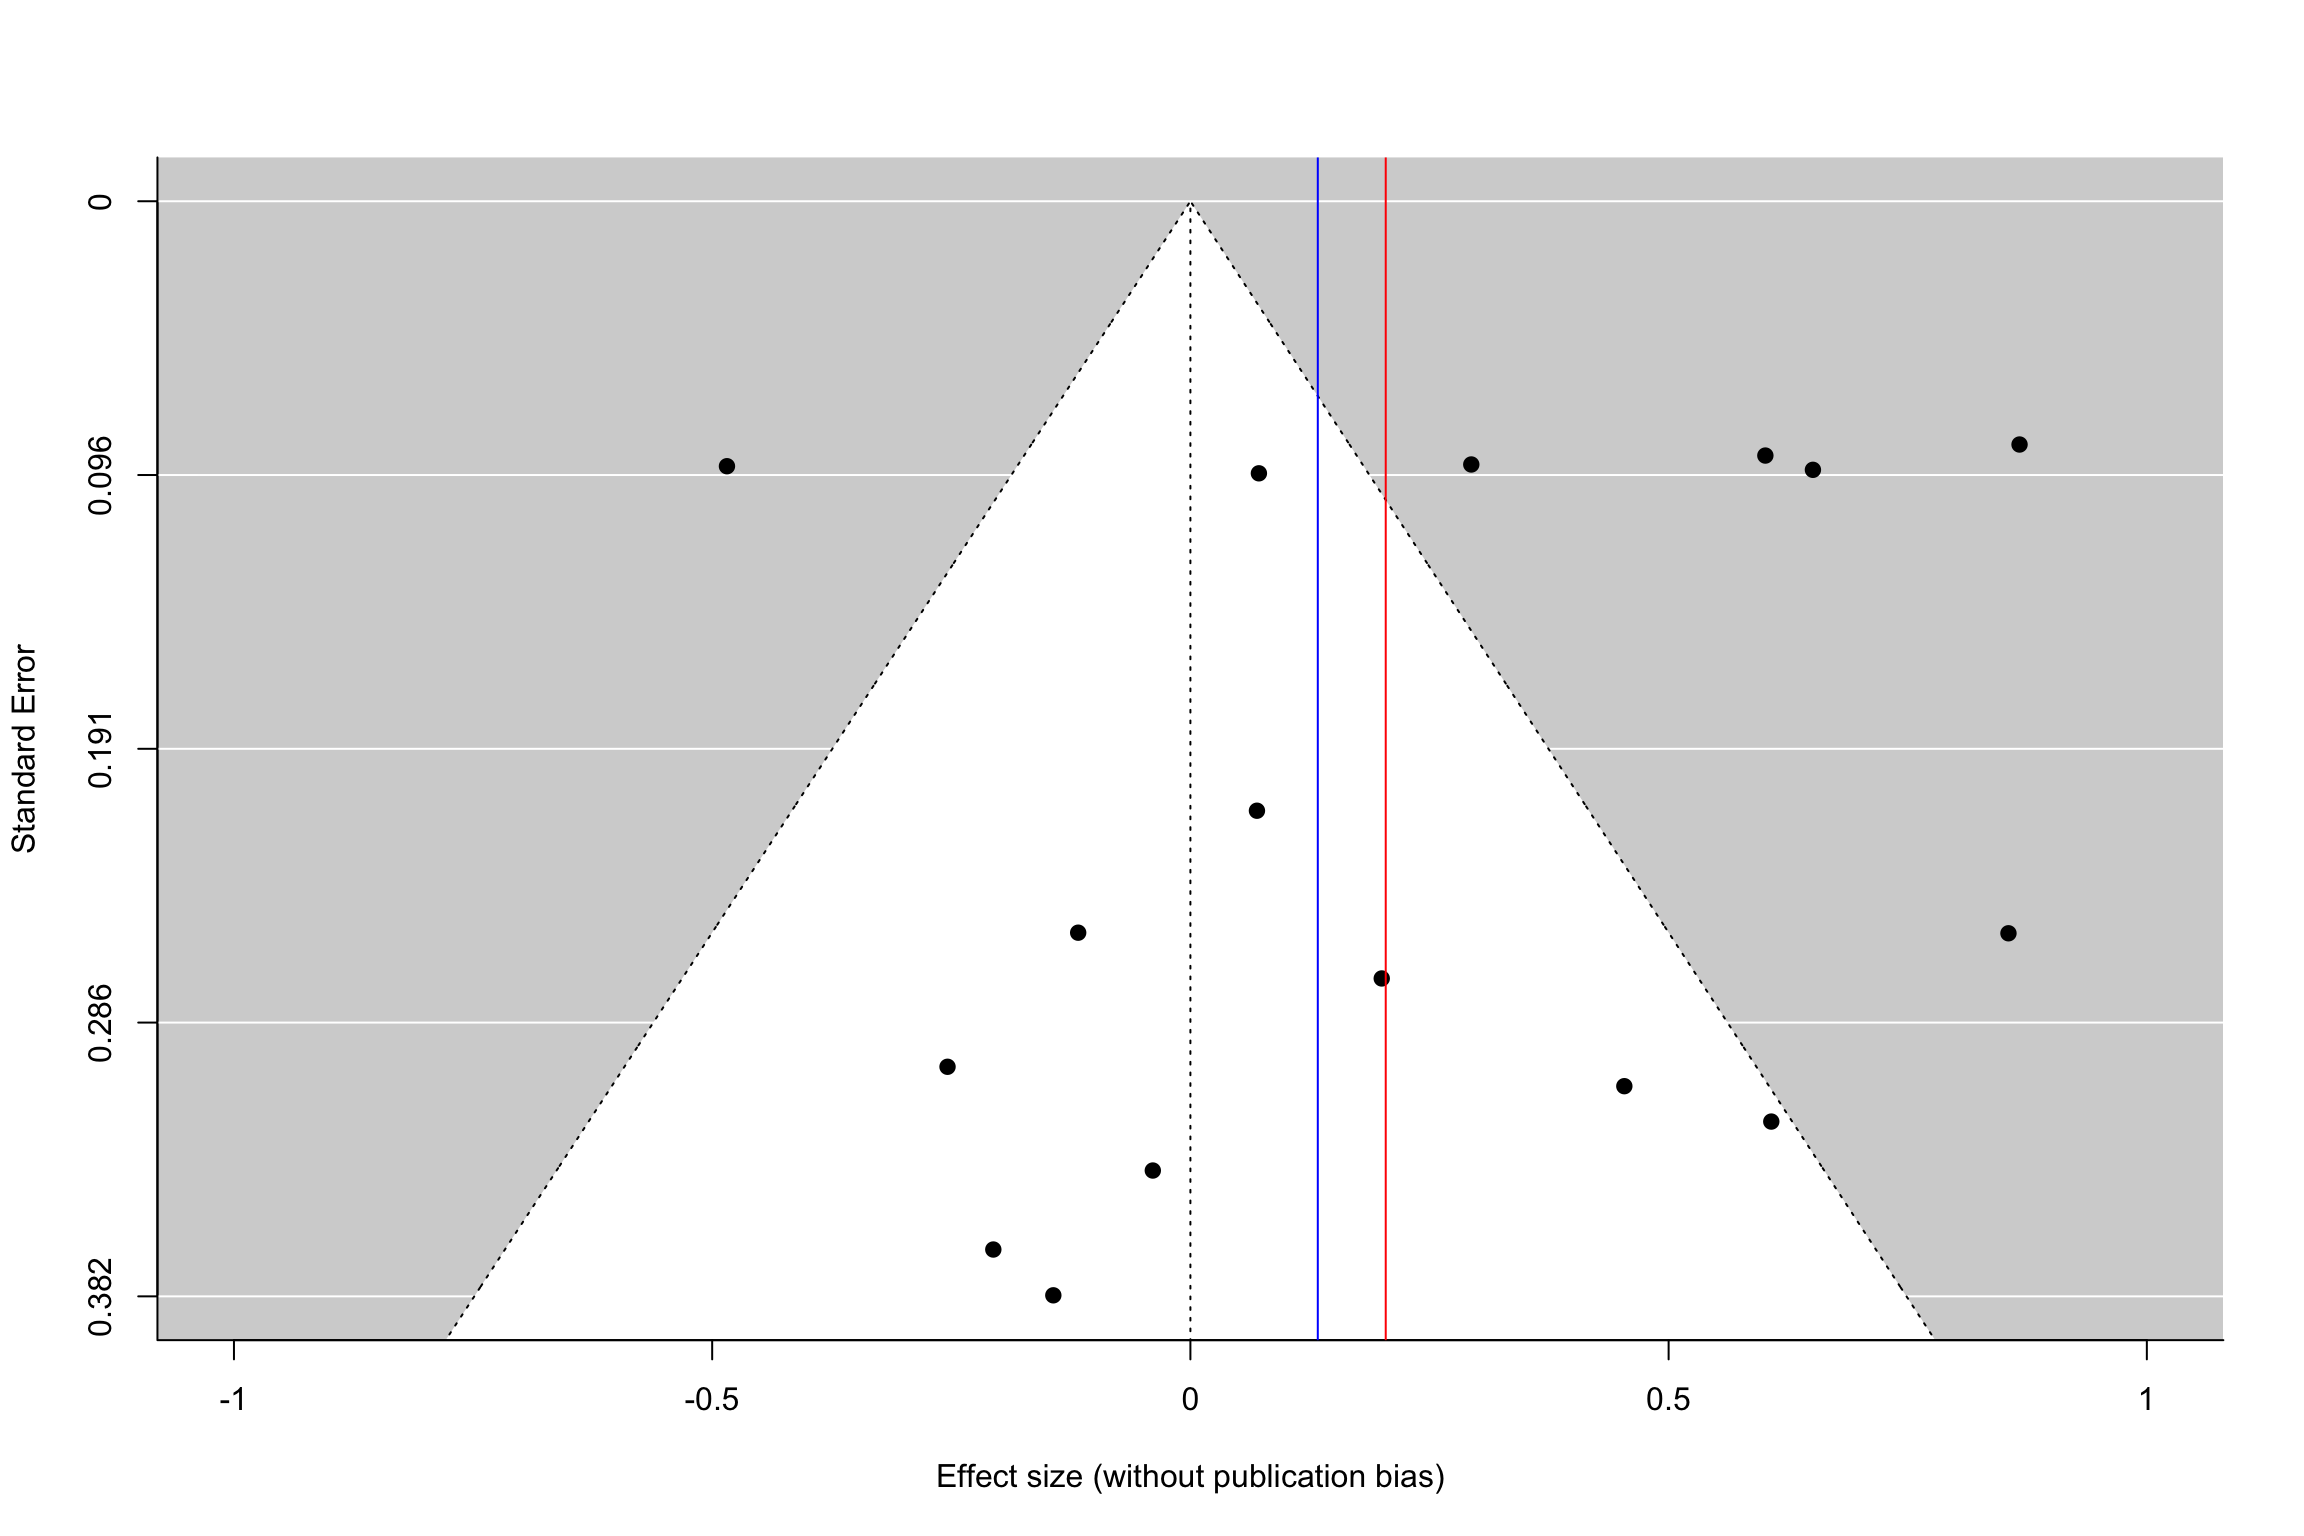 Funnel plot with and without publication bias (heterogeneous treatment effects, small and intermediate precision)